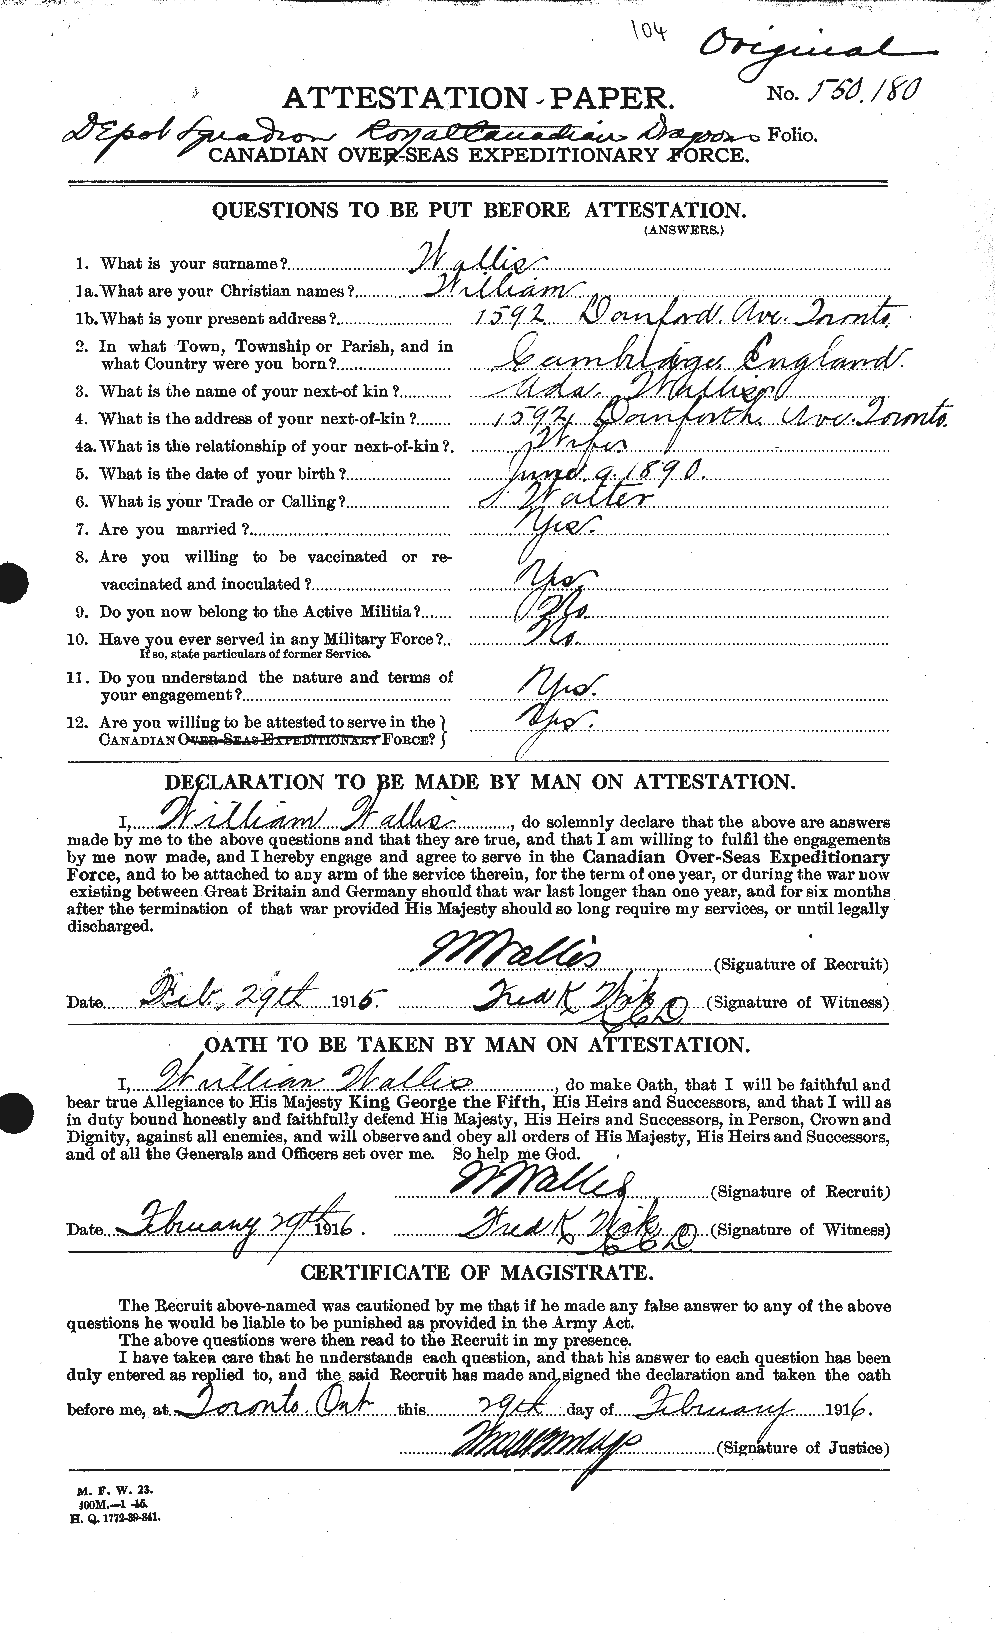 Personnel Records of the First World War - CEF 661038a